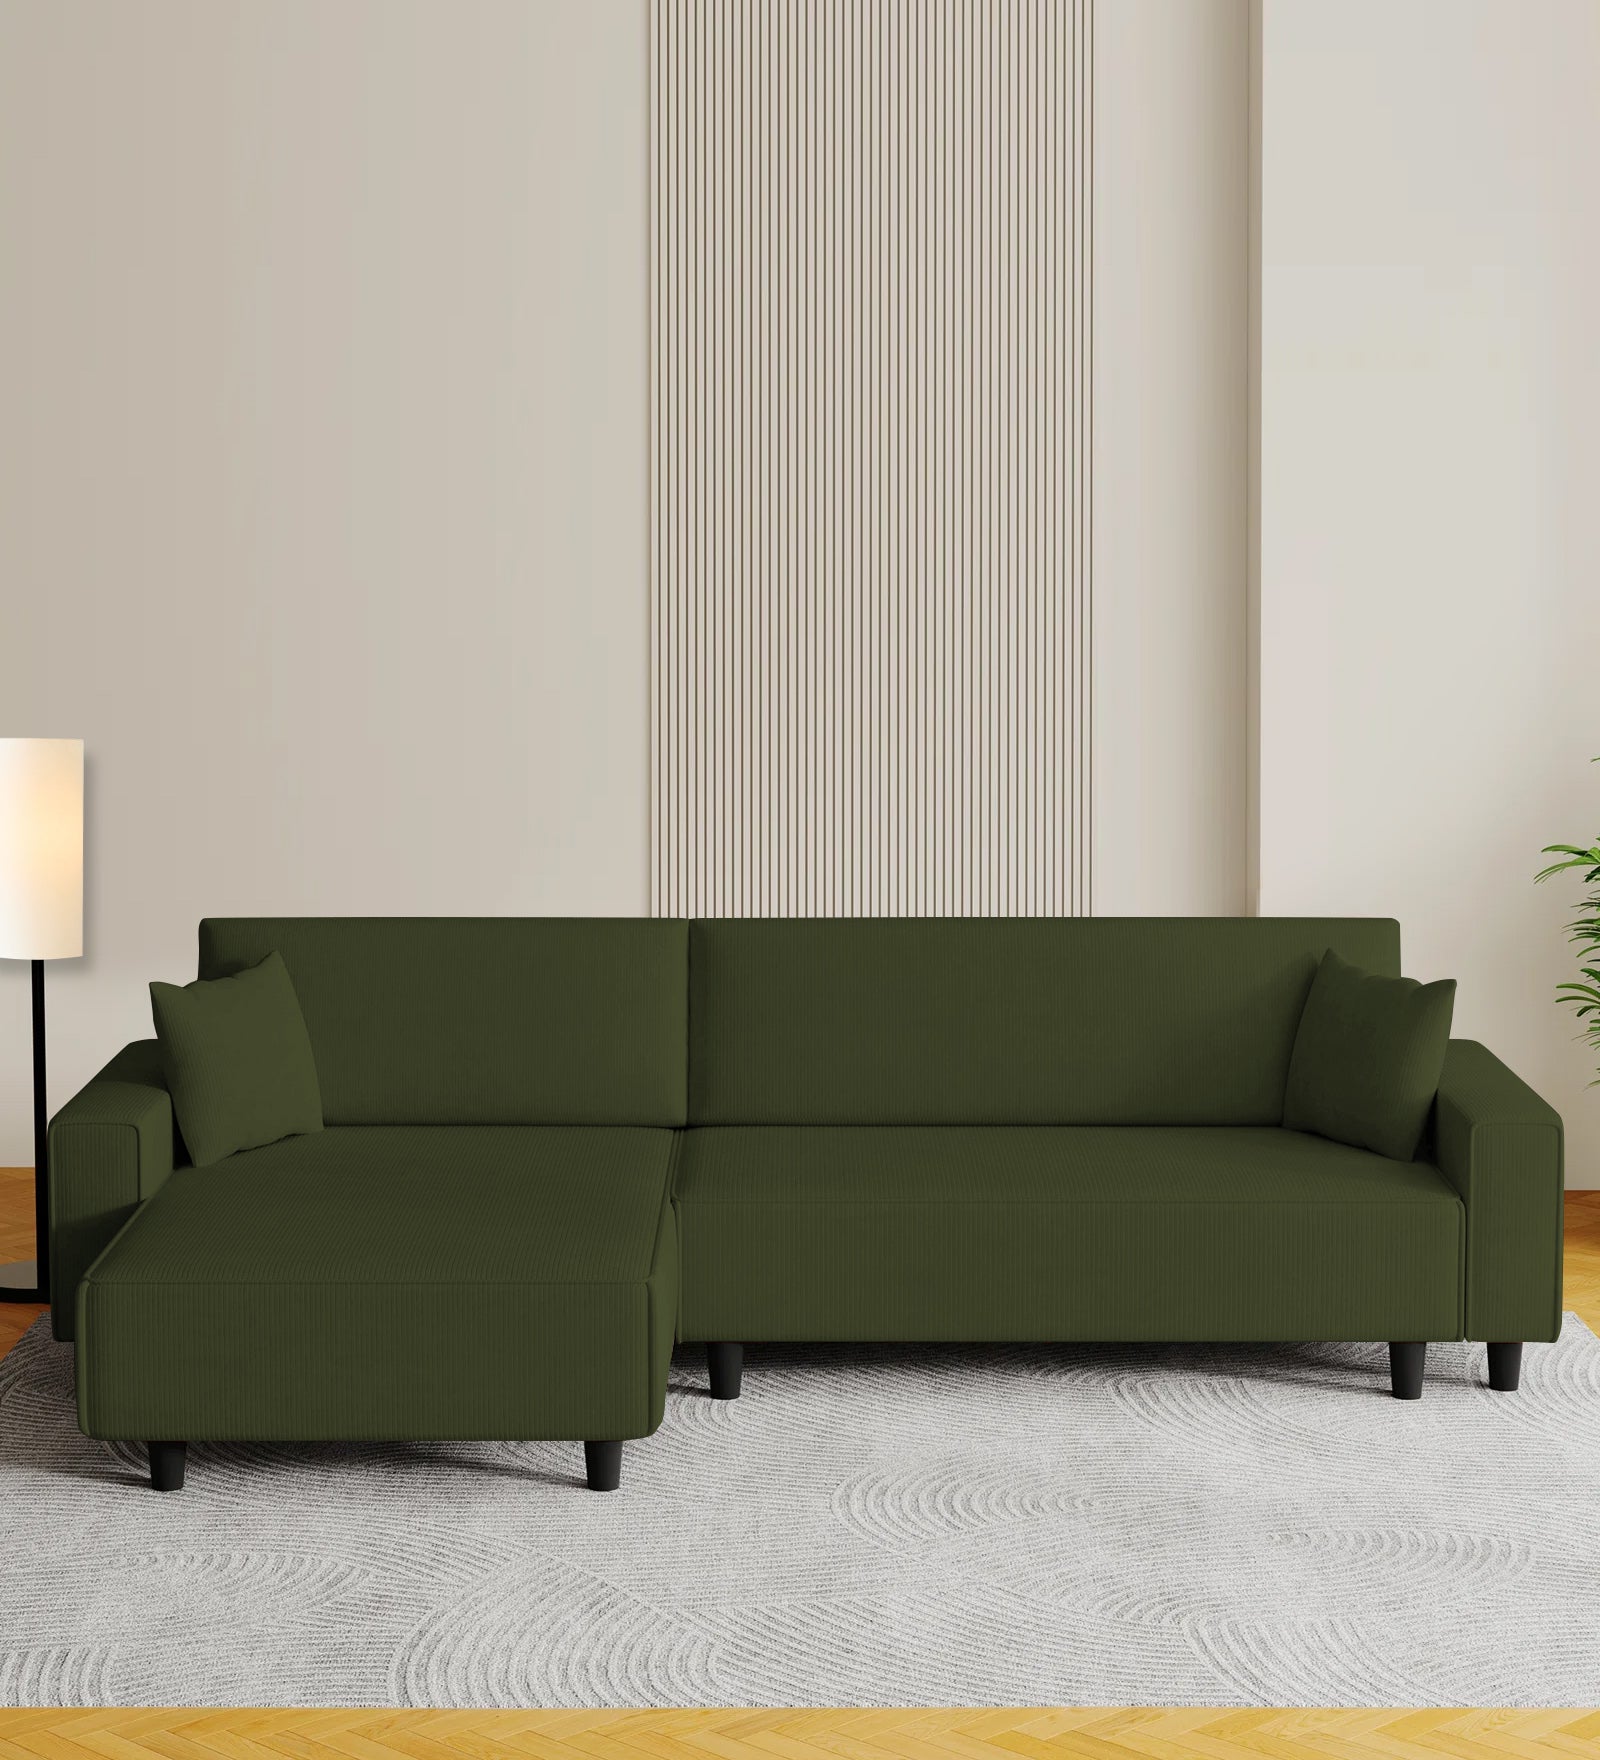 Peach Fabric RHS 6 Seater Sectional Sofa Cum Bed With Storage In Olive Green Colour